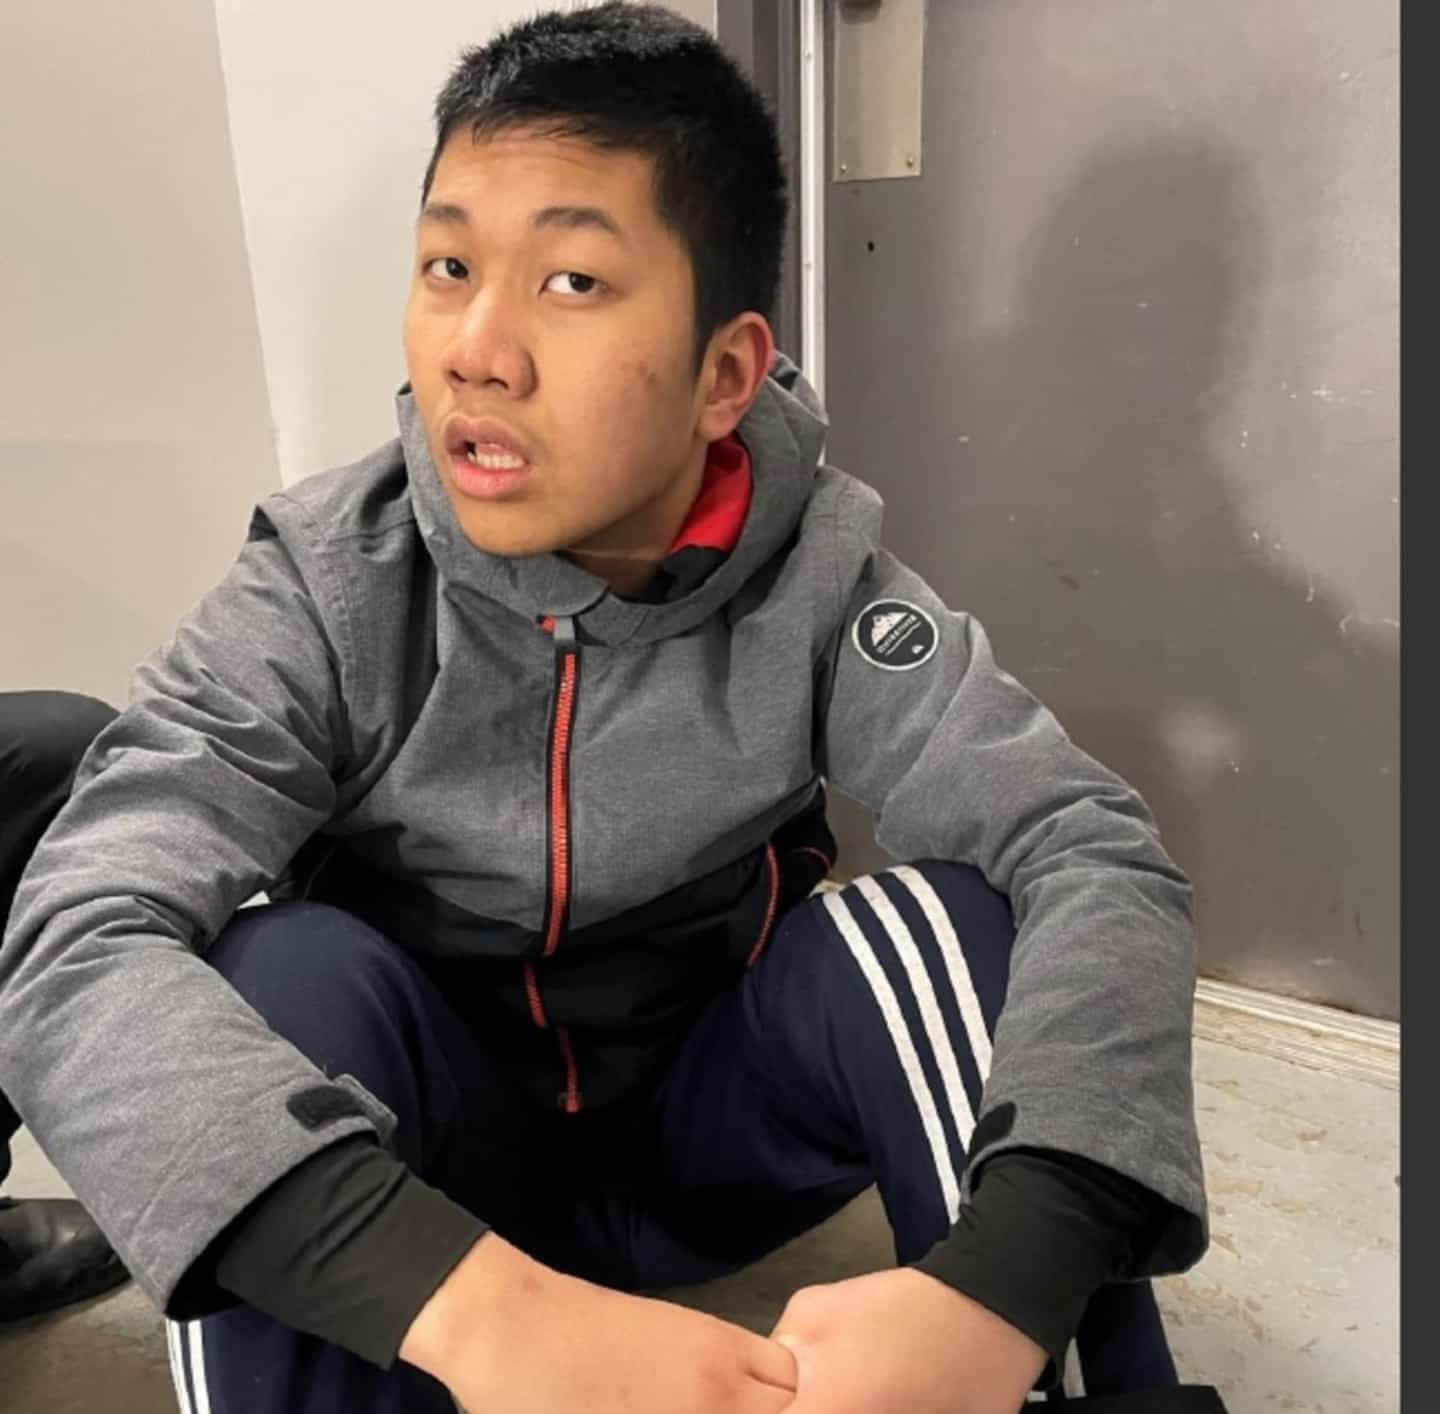 Montreal: a teenager is missing